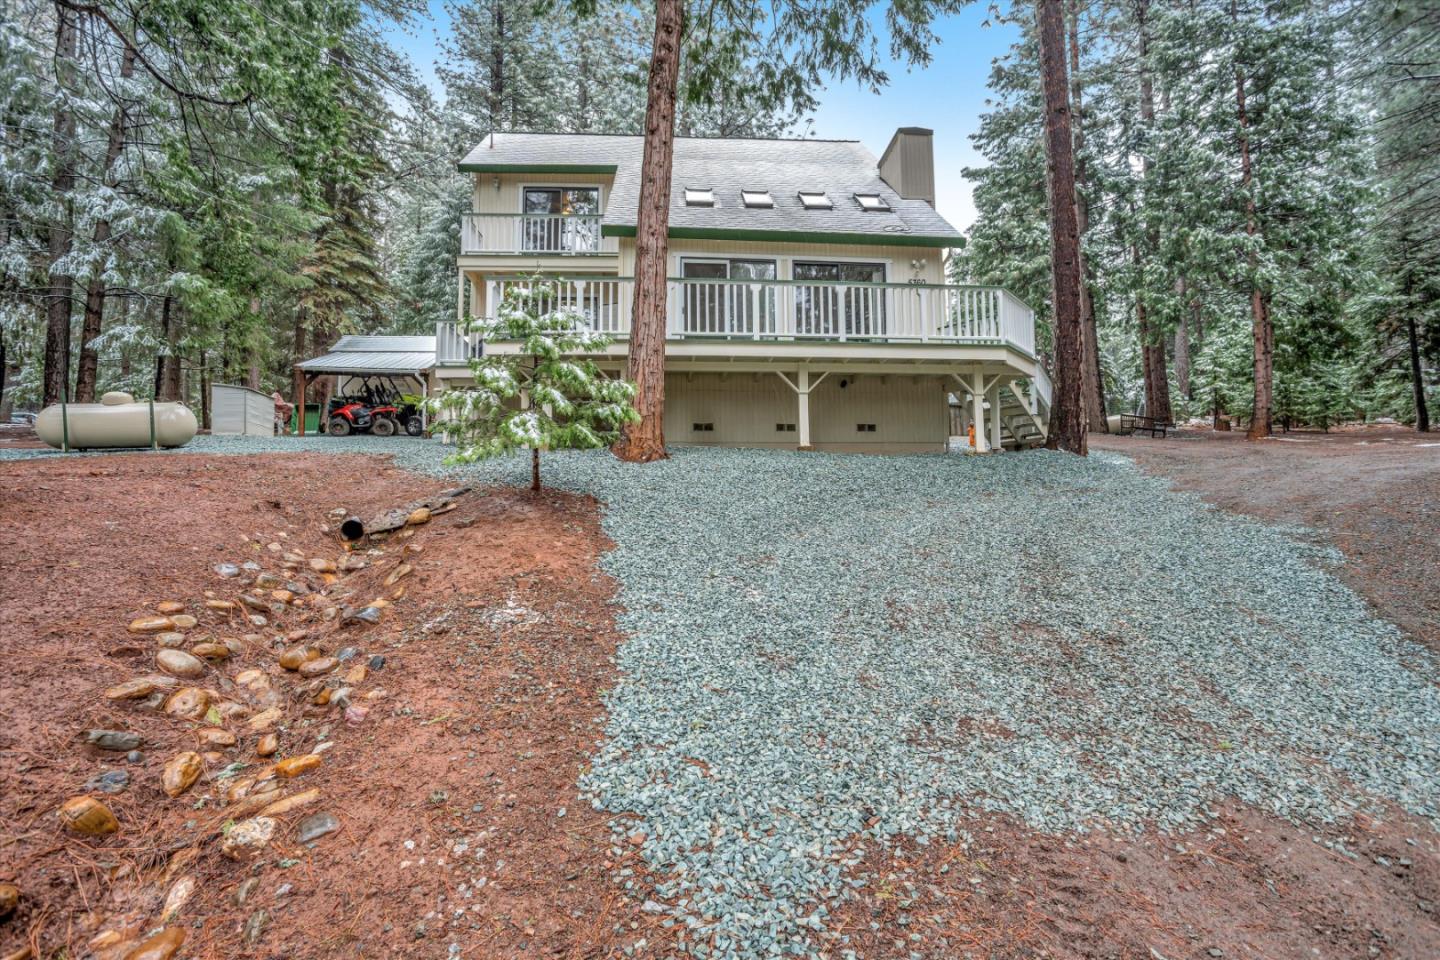 Photo of 5360 Pine Ridge Dr in Grizzly Flats, CA